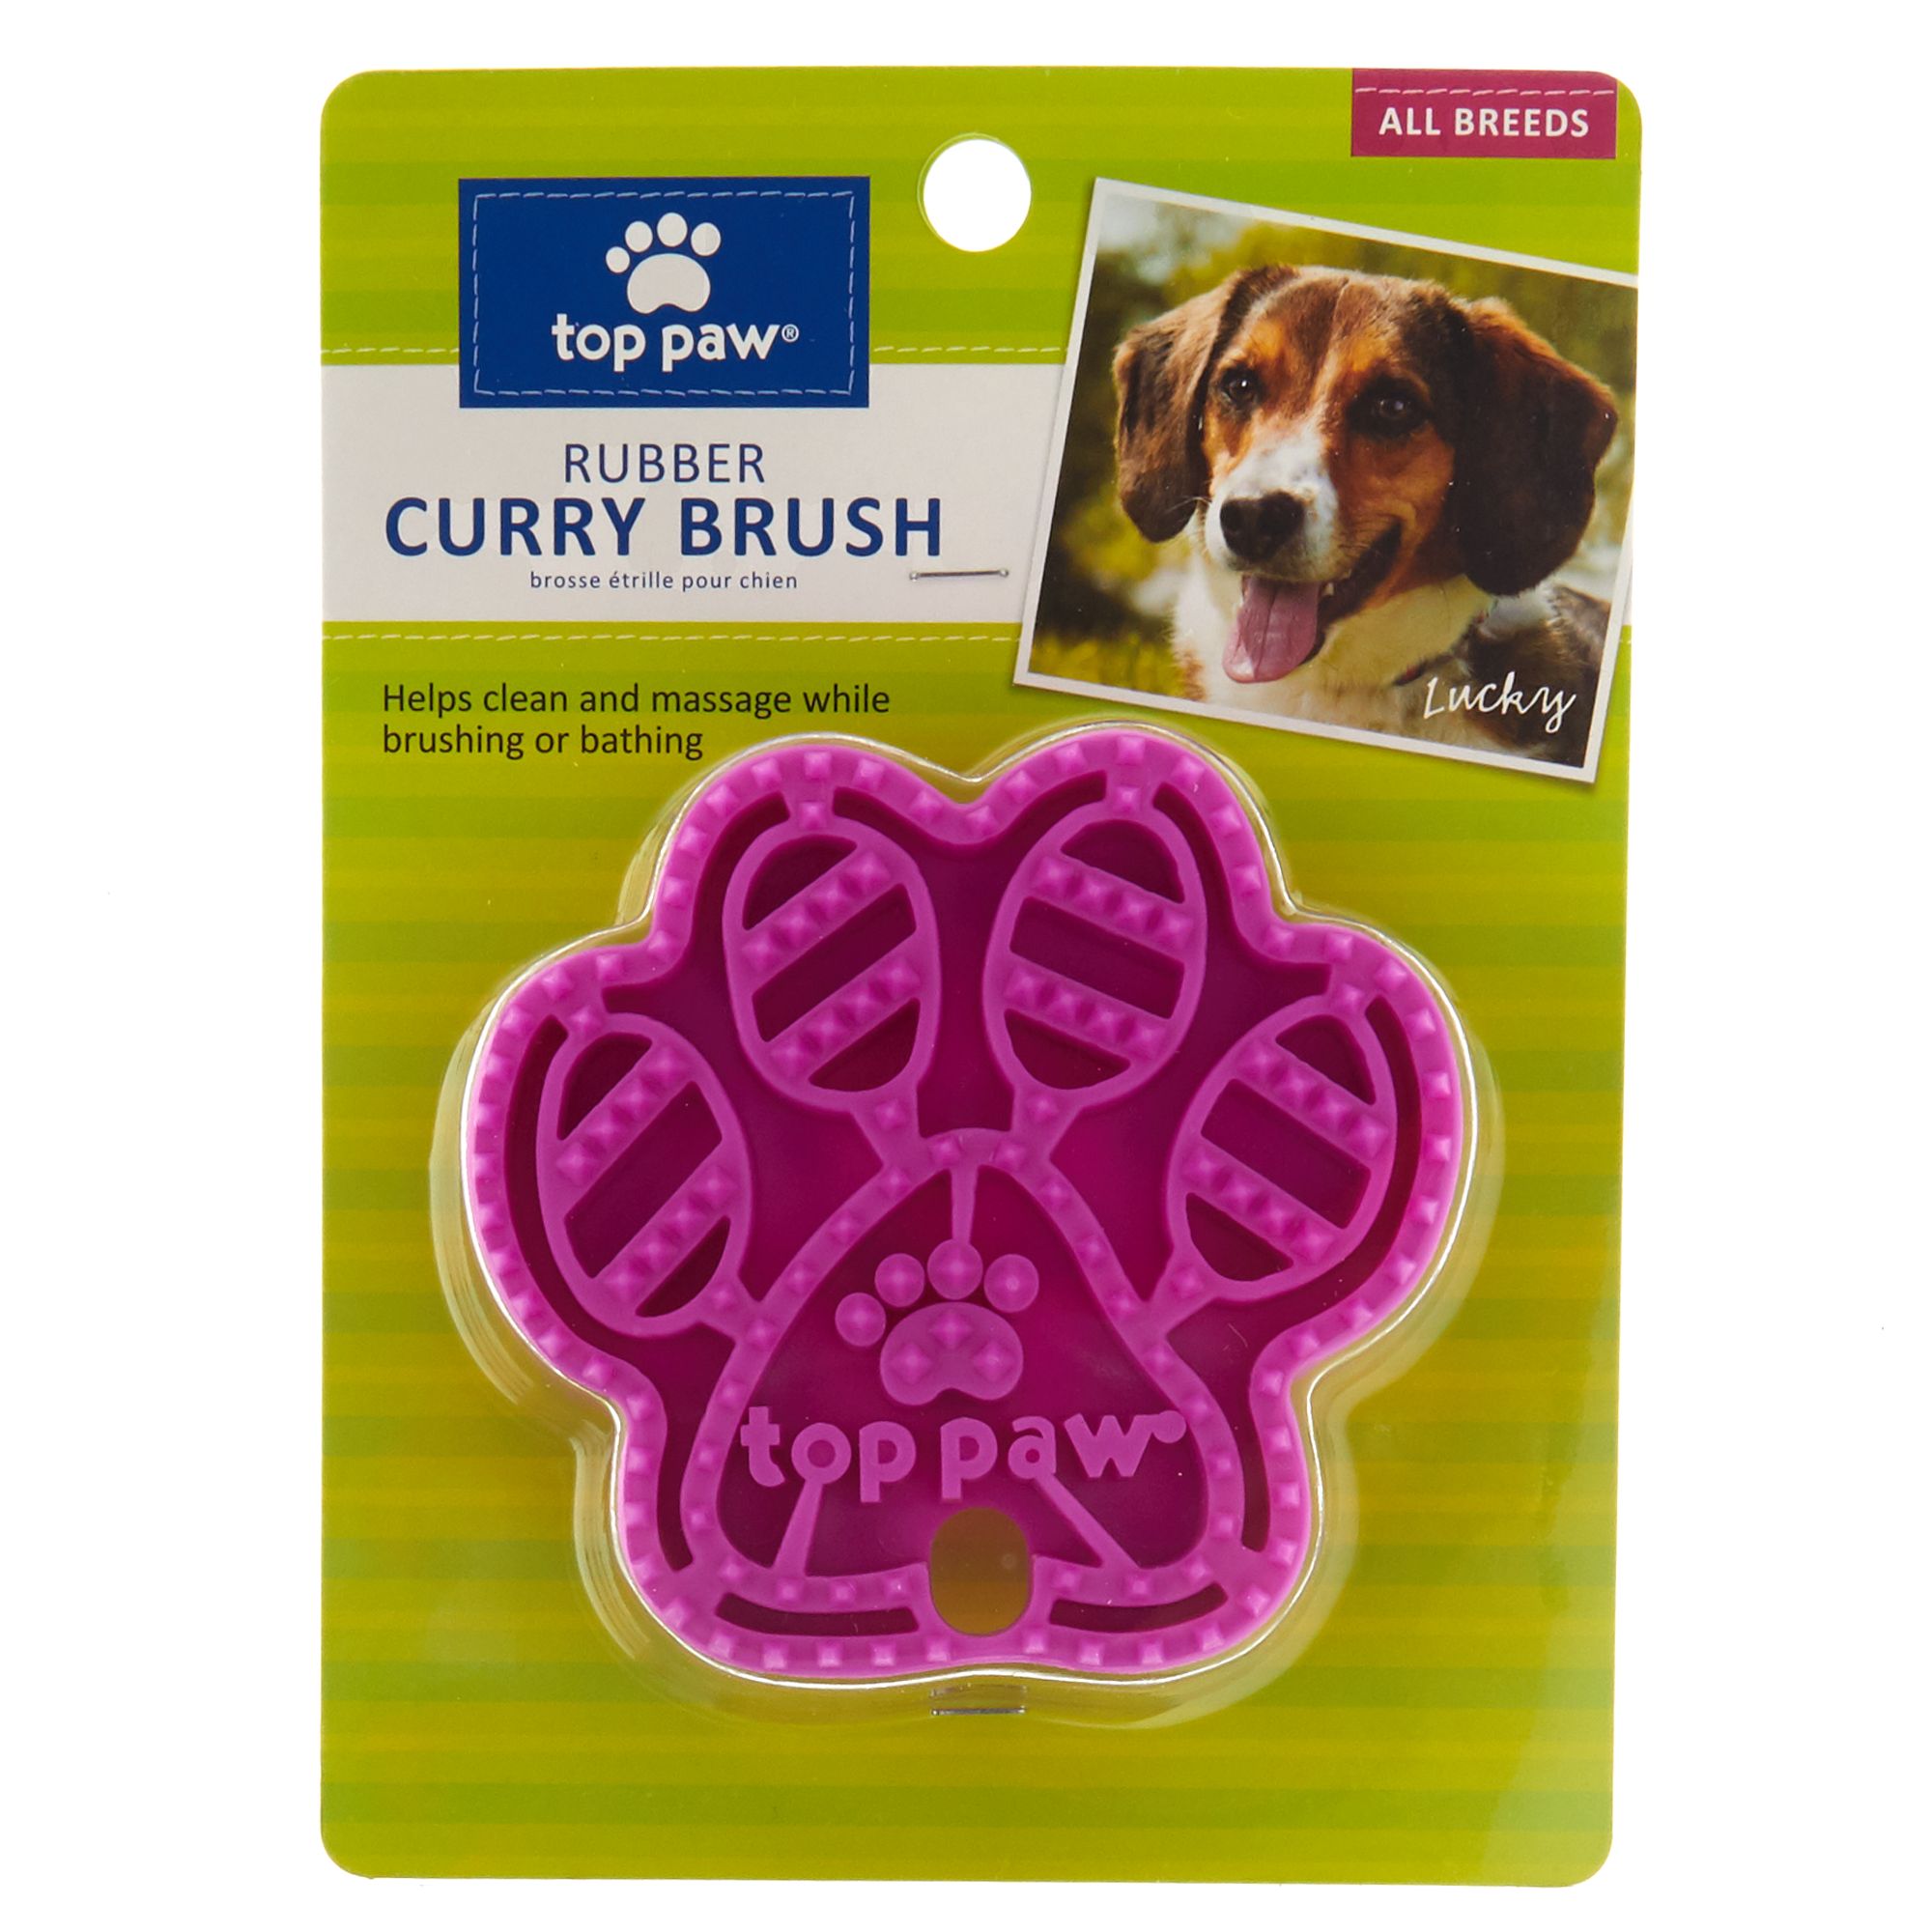 curry brush for dogs